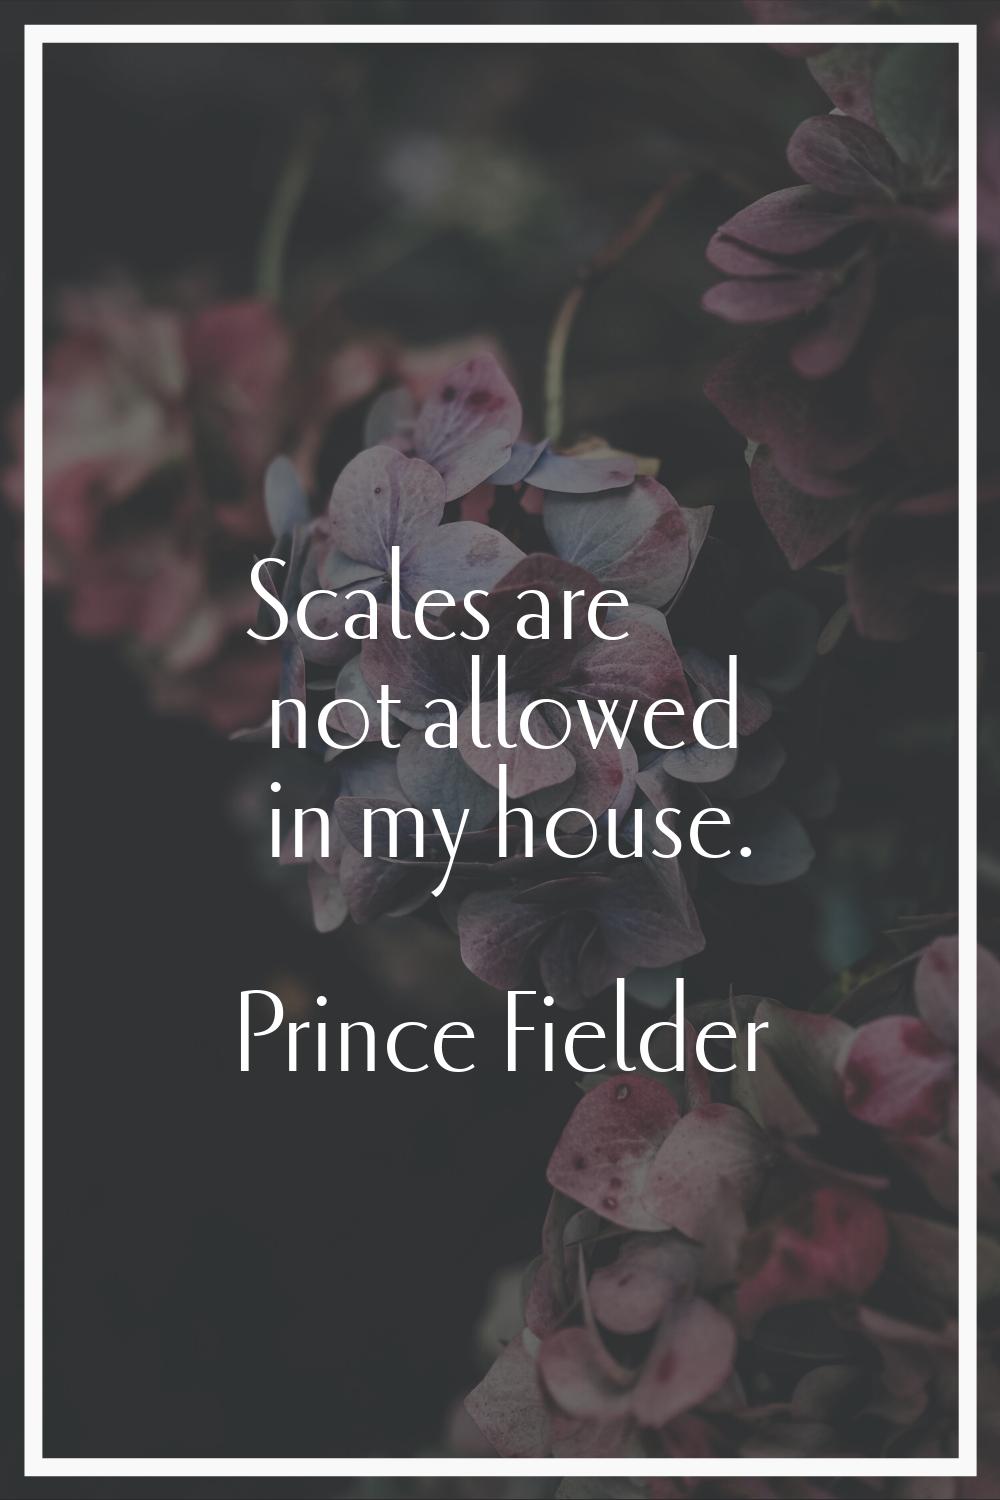 Scales are not allowed in my house.